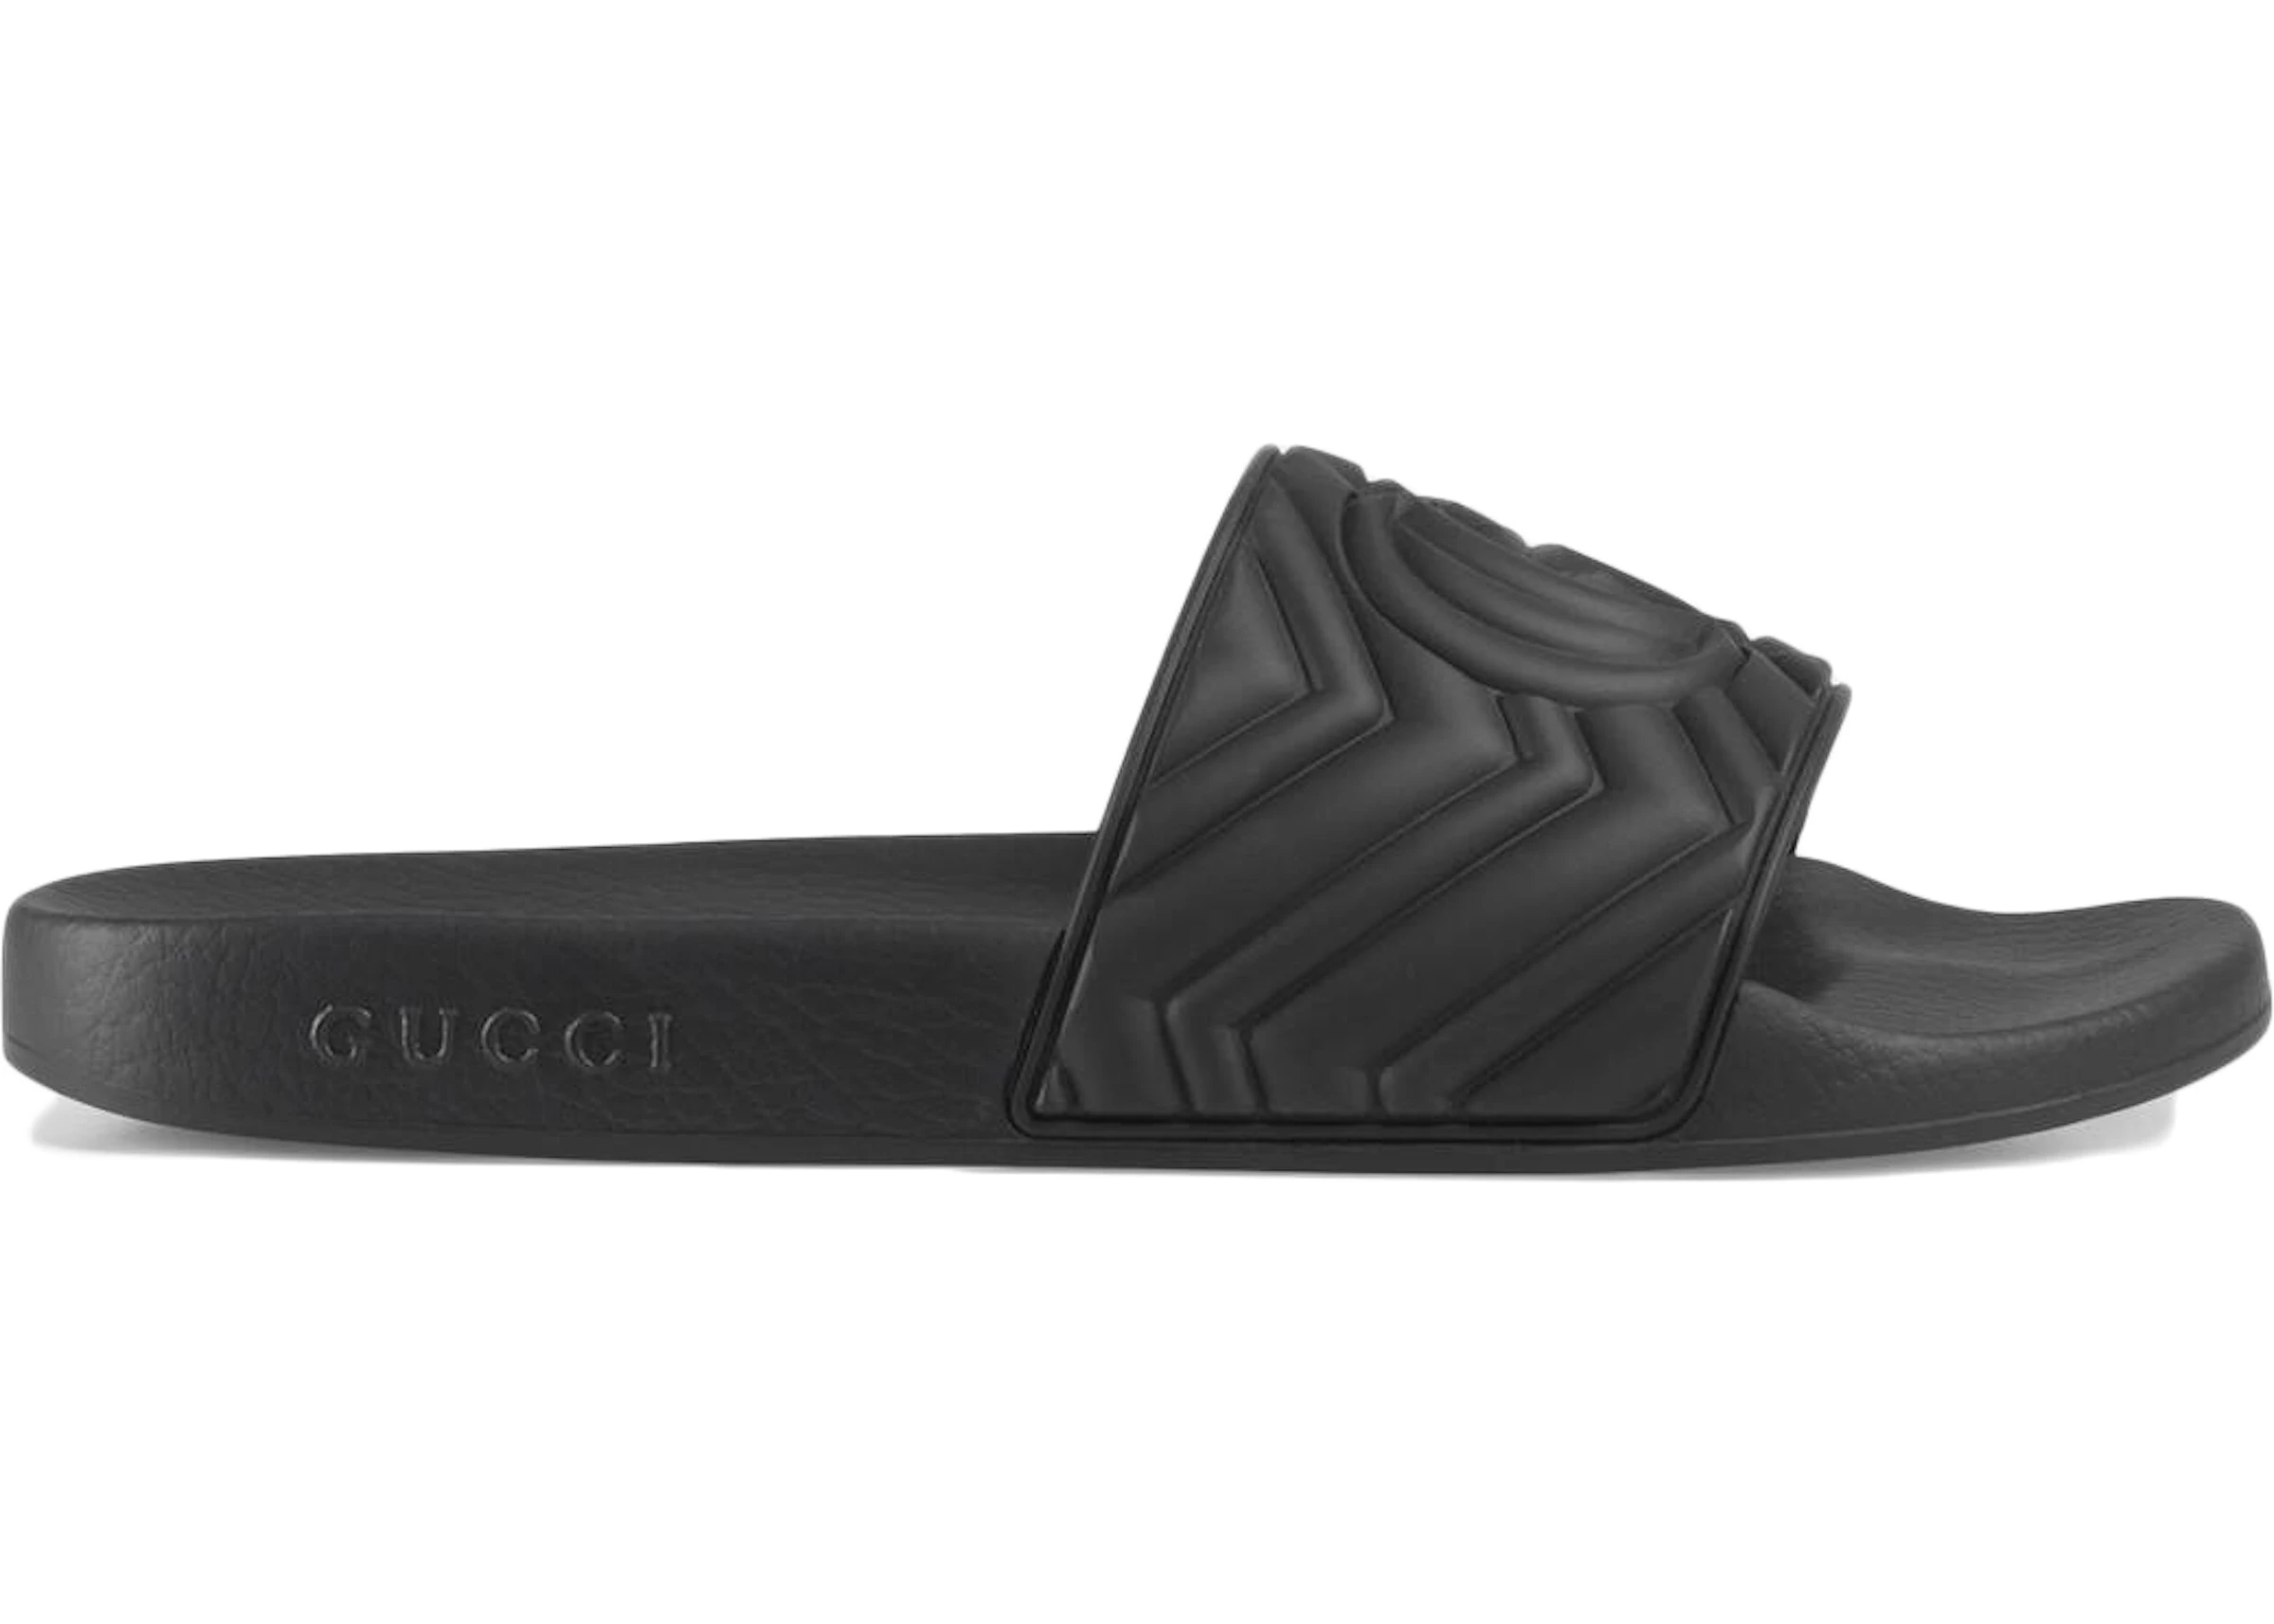 Buy Gucci Slides & Sandals Shoes & New Sneakers - StockX